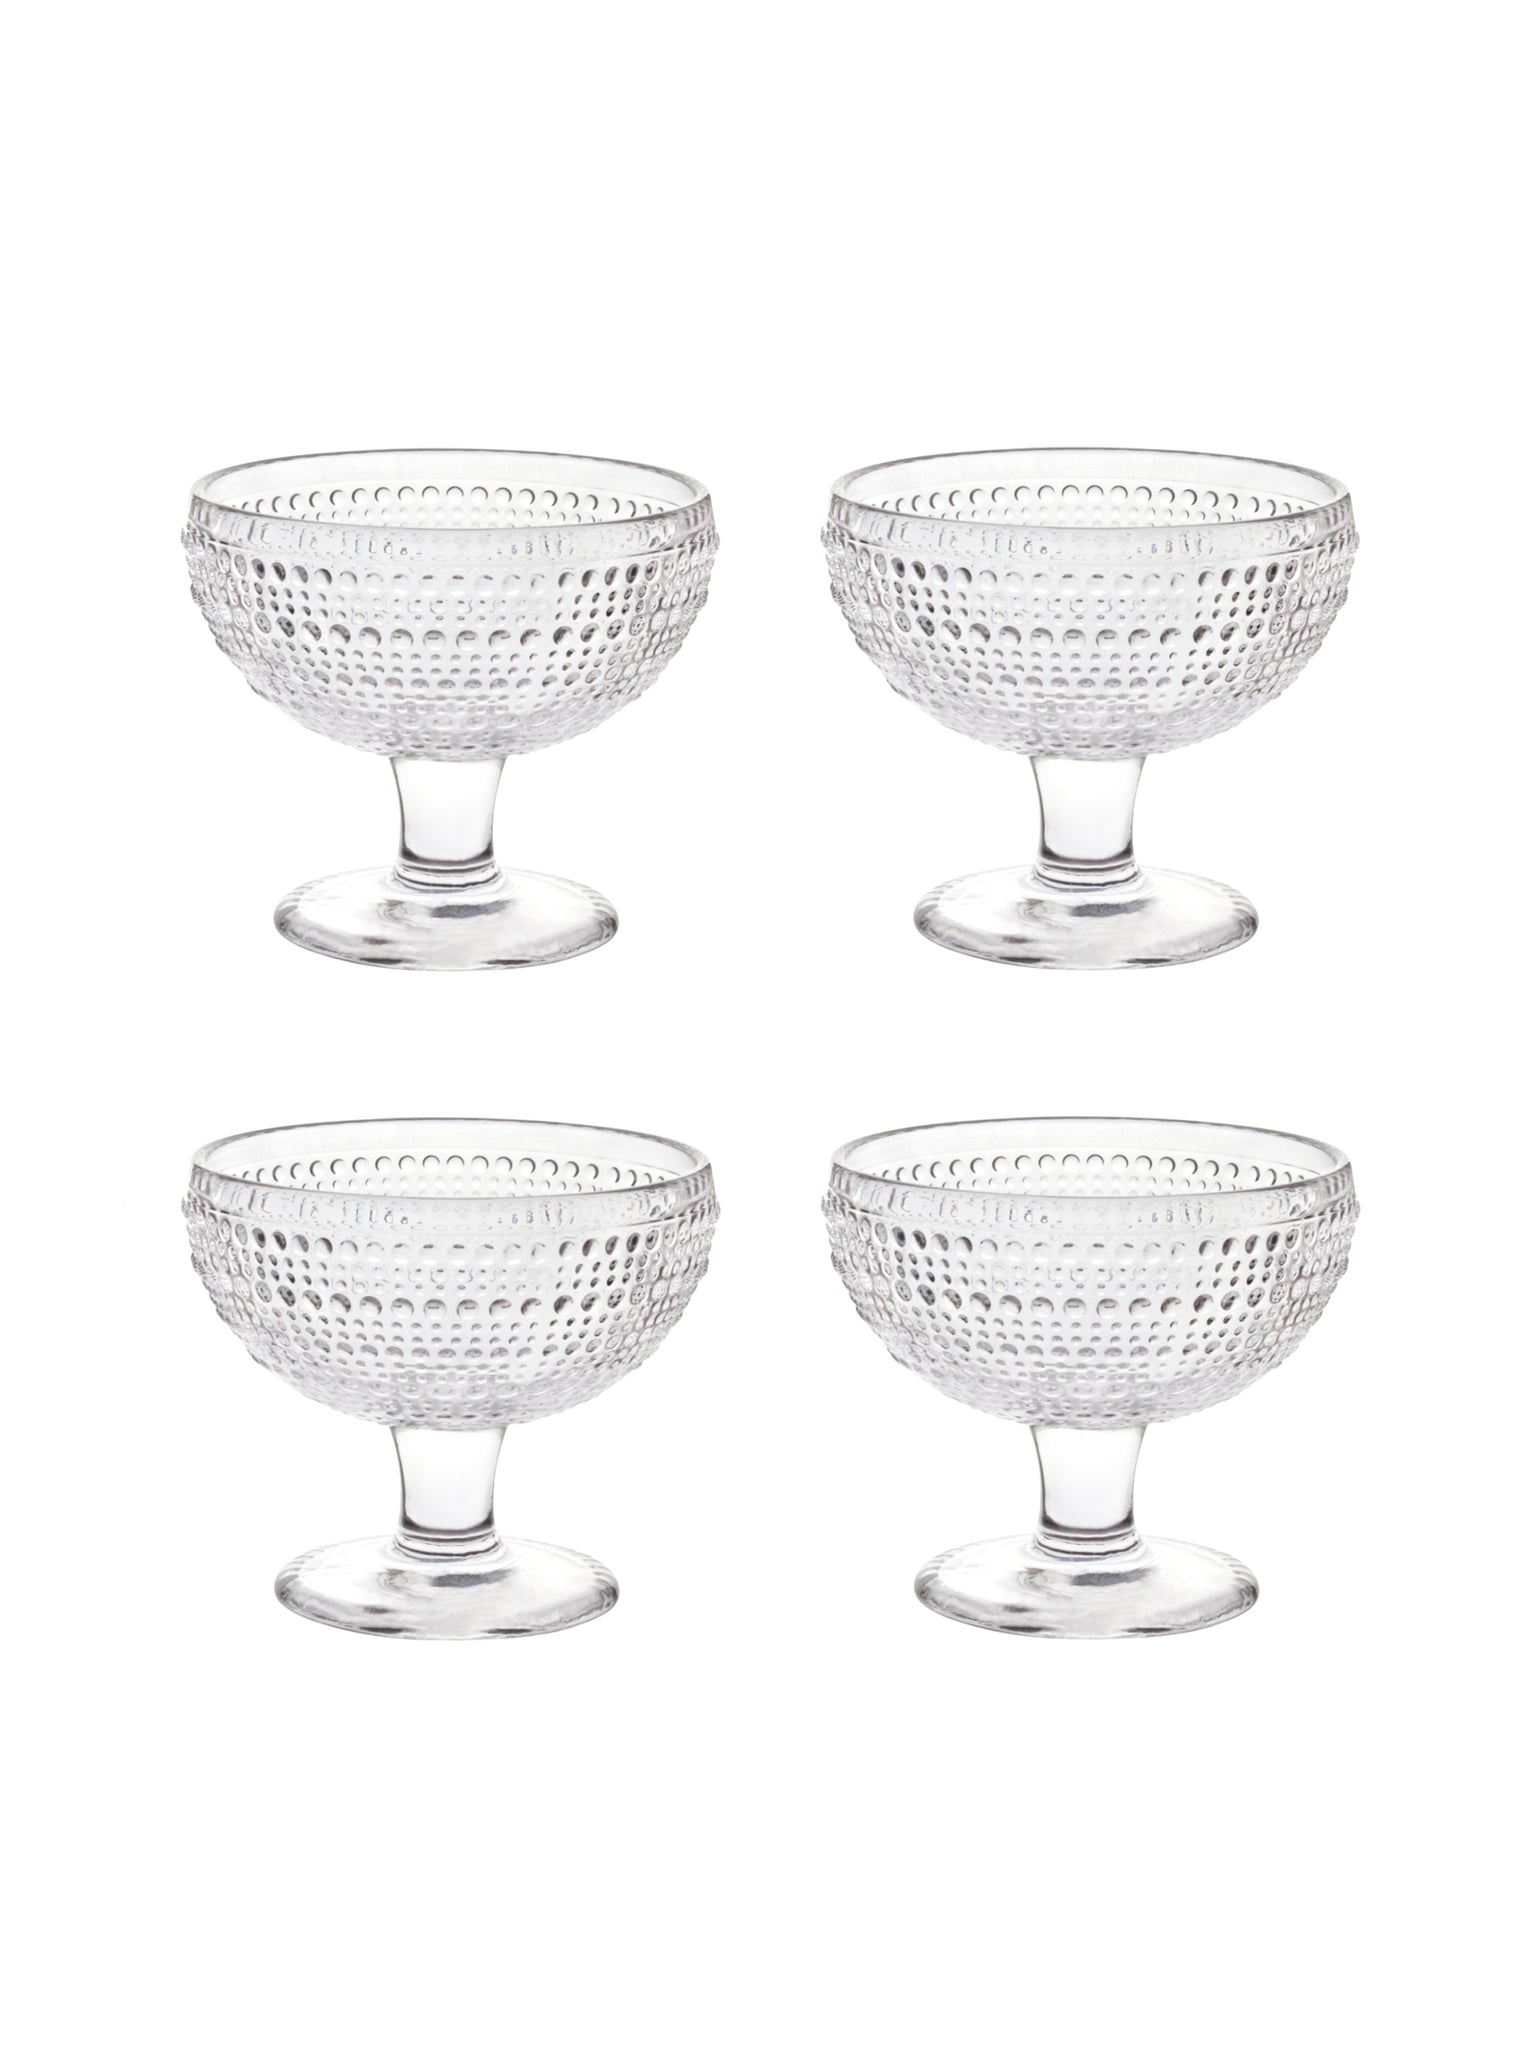 Pearls Dessert Dishes Set of Four Weston Table